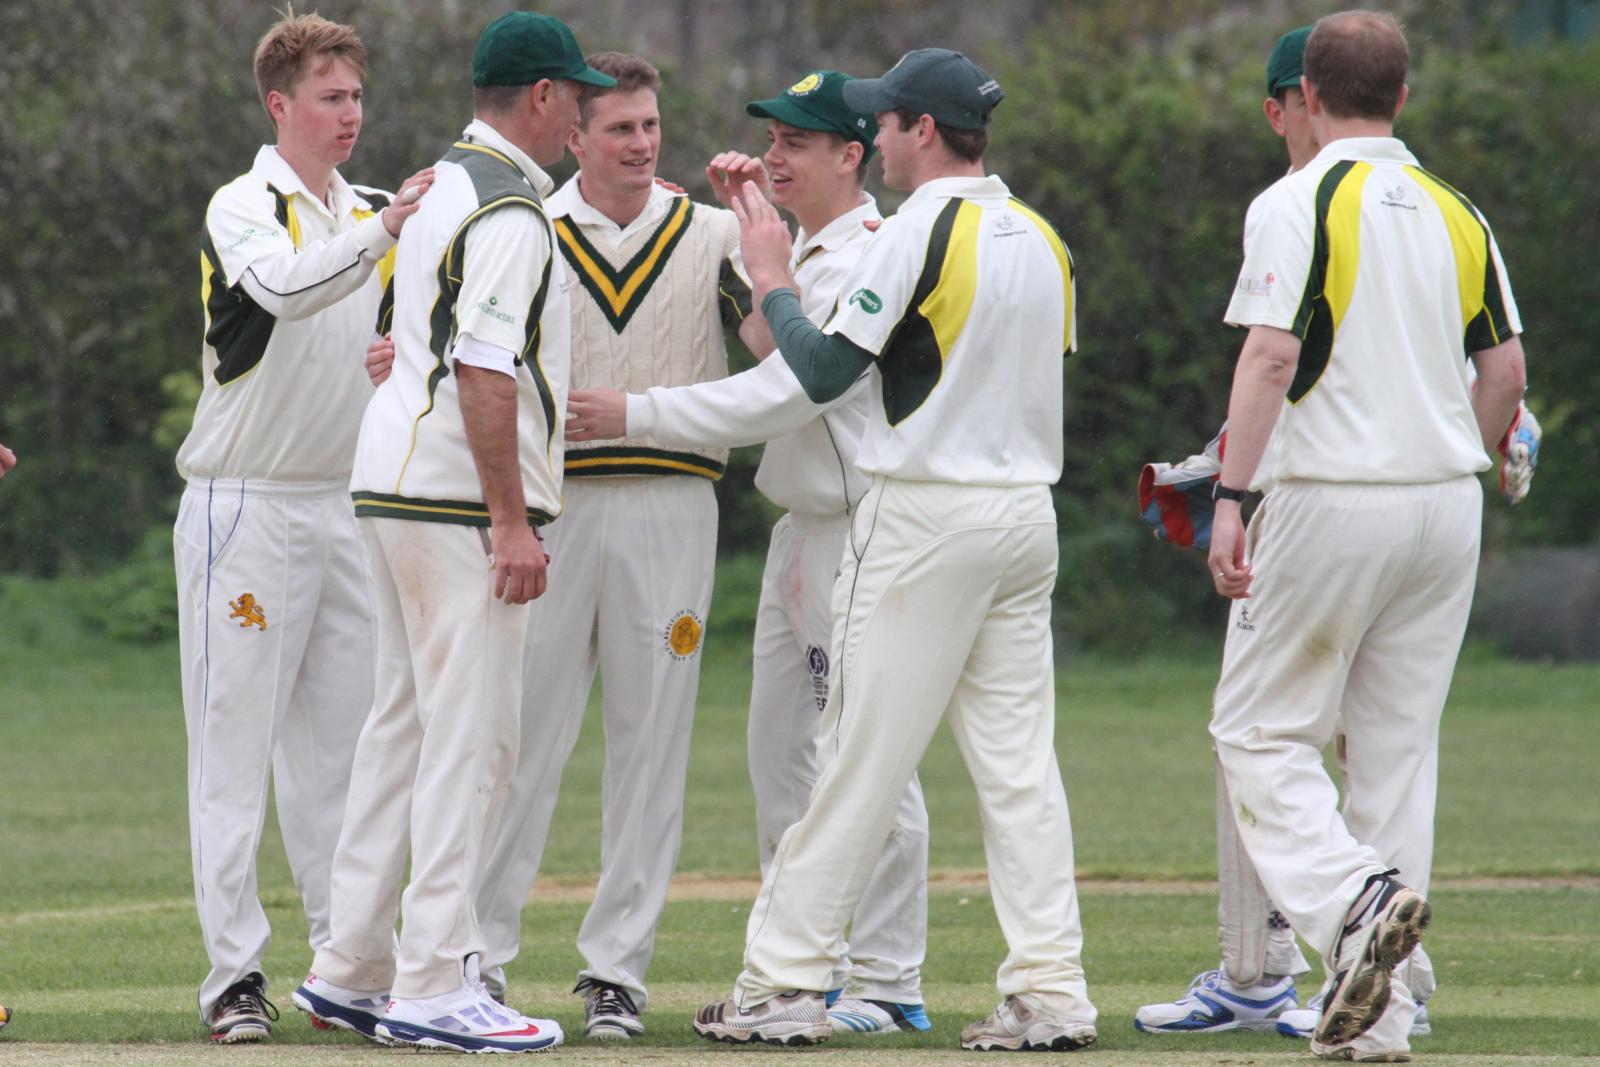 Budleigh Salterton celebrate the fall of a wicket - will they be celebrating promotion in September?